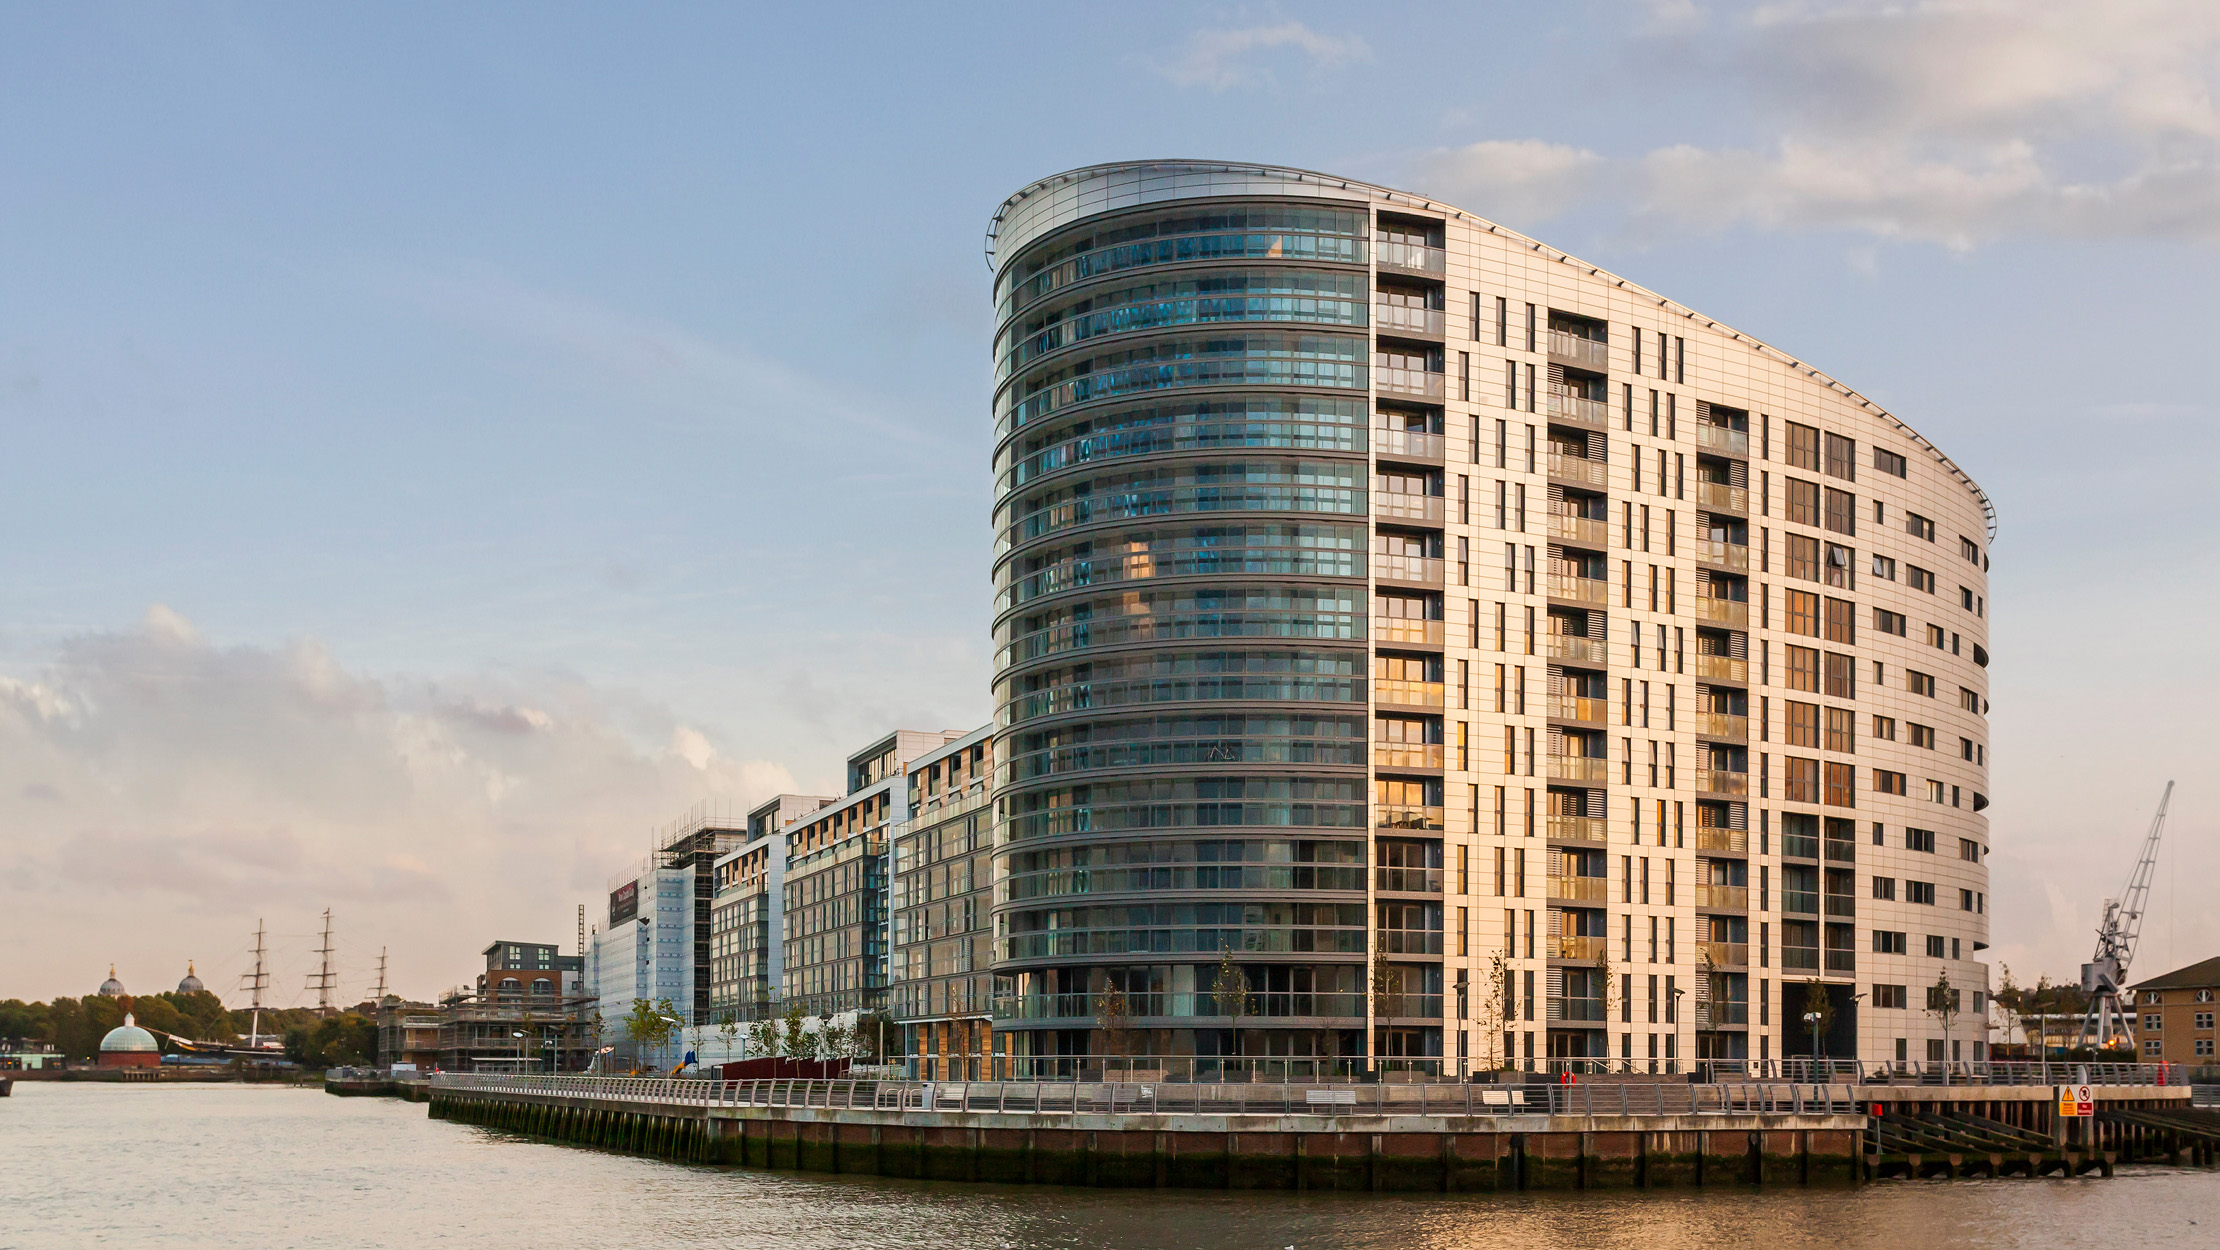 Minister for Housing Visits New Capital Quay in Greenwich